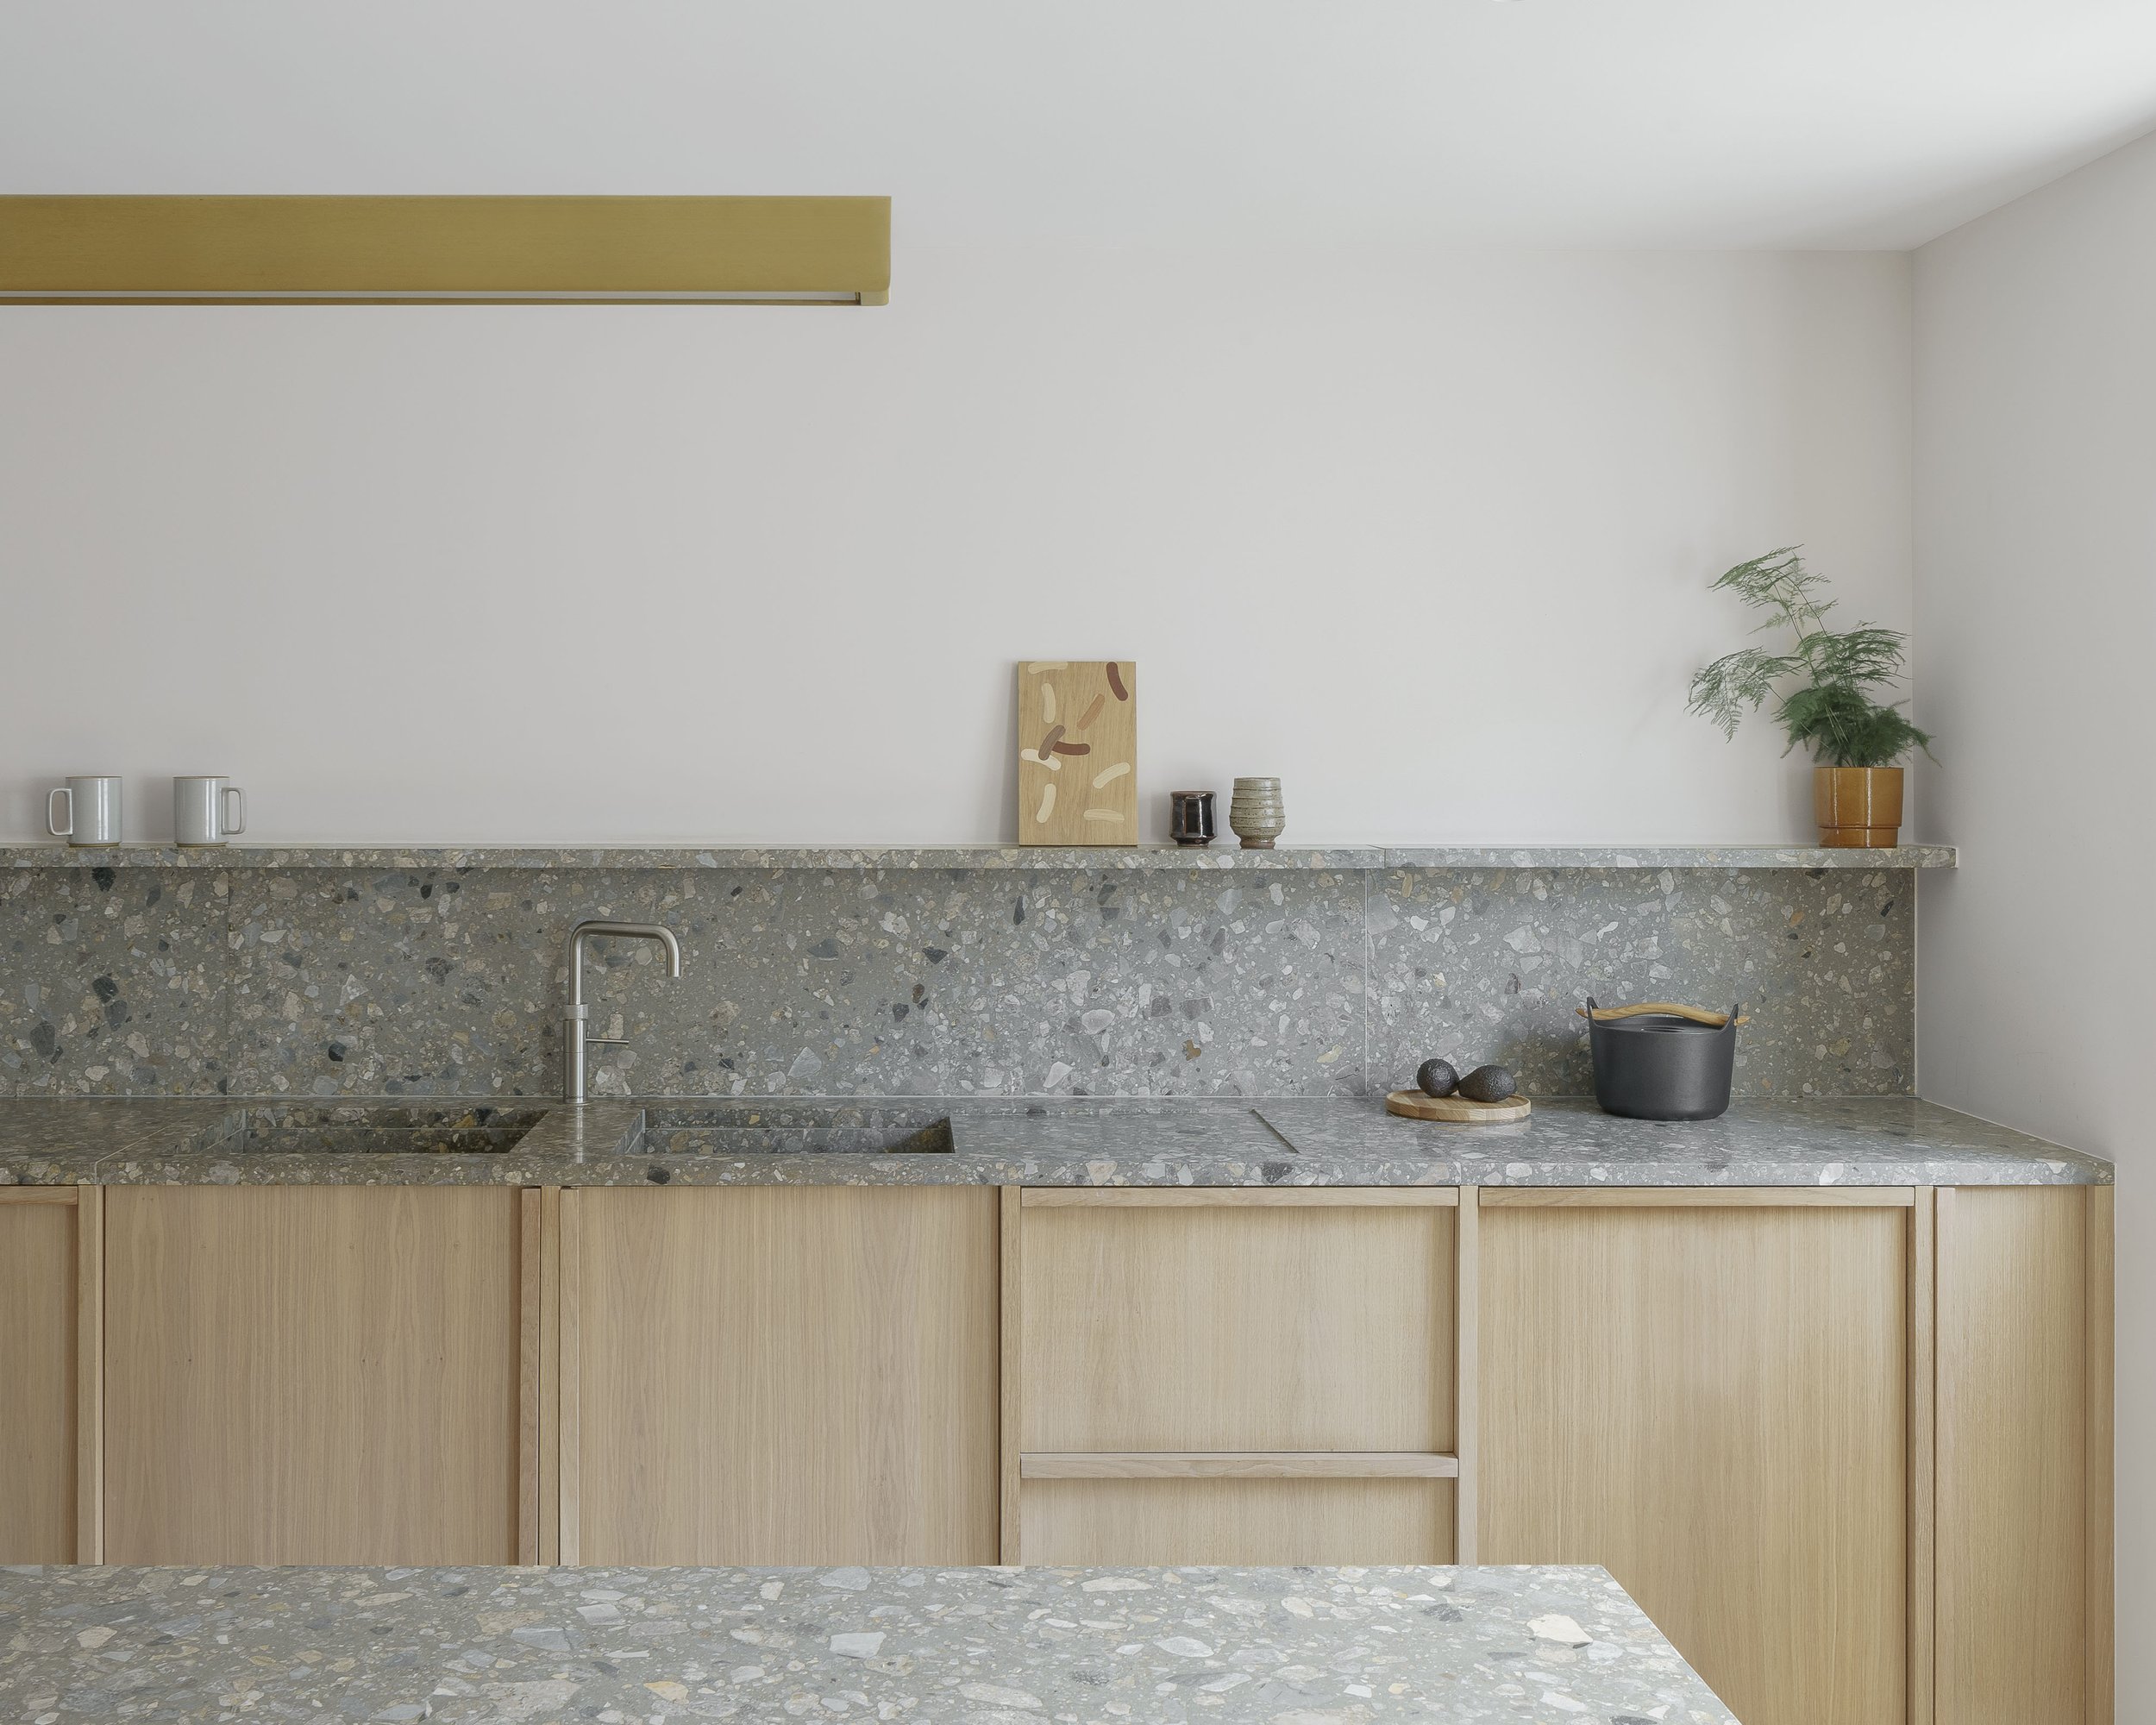 Architecture-for-London_Stone-House_Kitchen-3_Credit_Building-Narratives.jpg